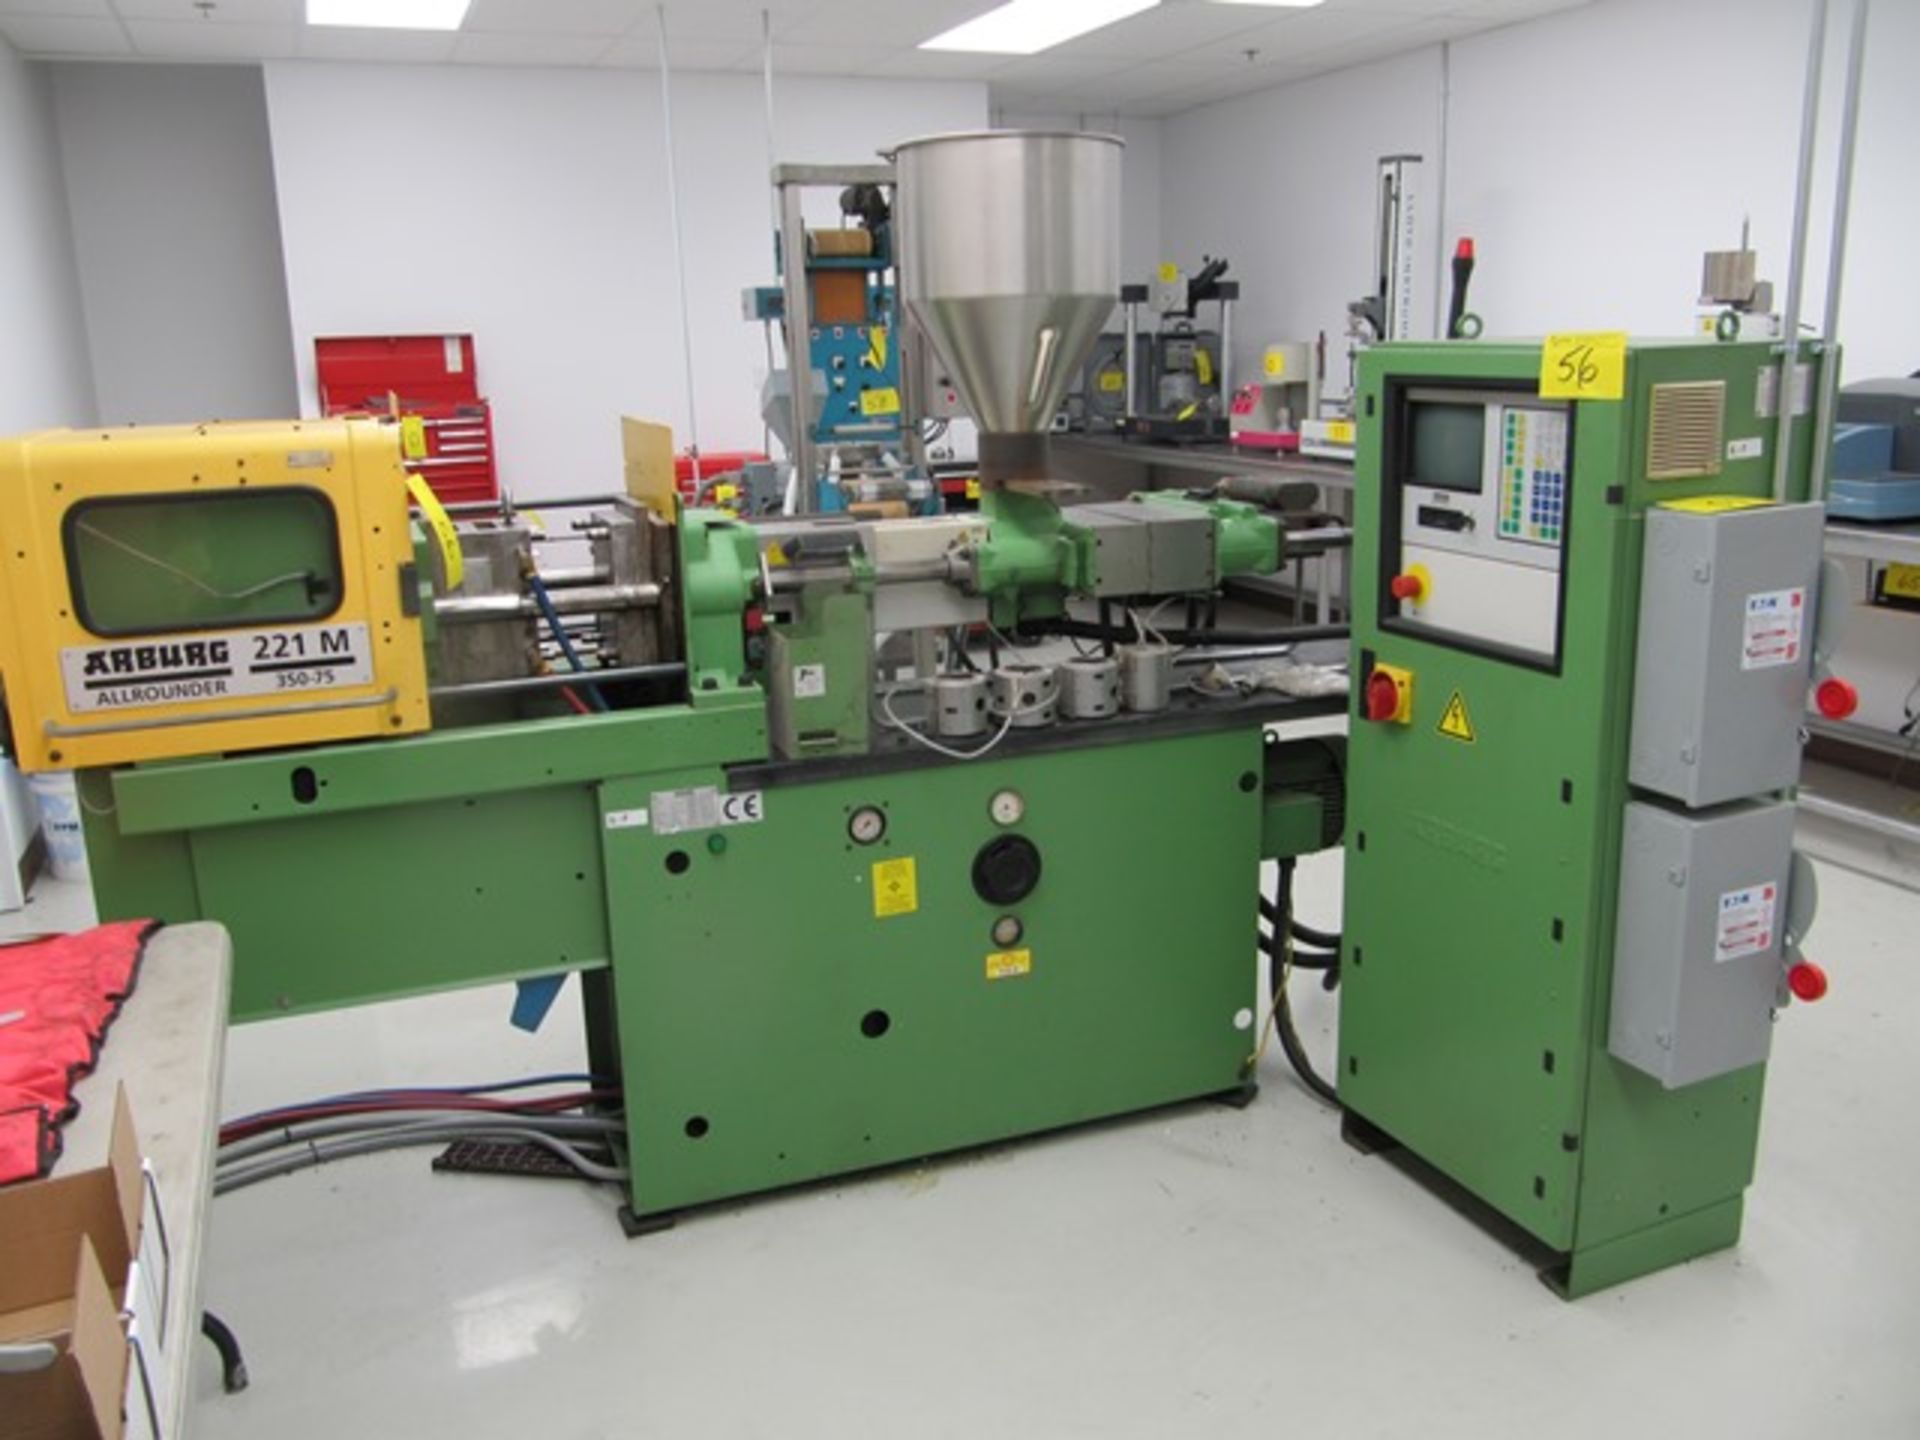 ARBURG 221 M380-75 25-TON APPROX. INJECTION MOULDER W/MULTRONICA CONTROL, ETC.  S/N:  173097  (